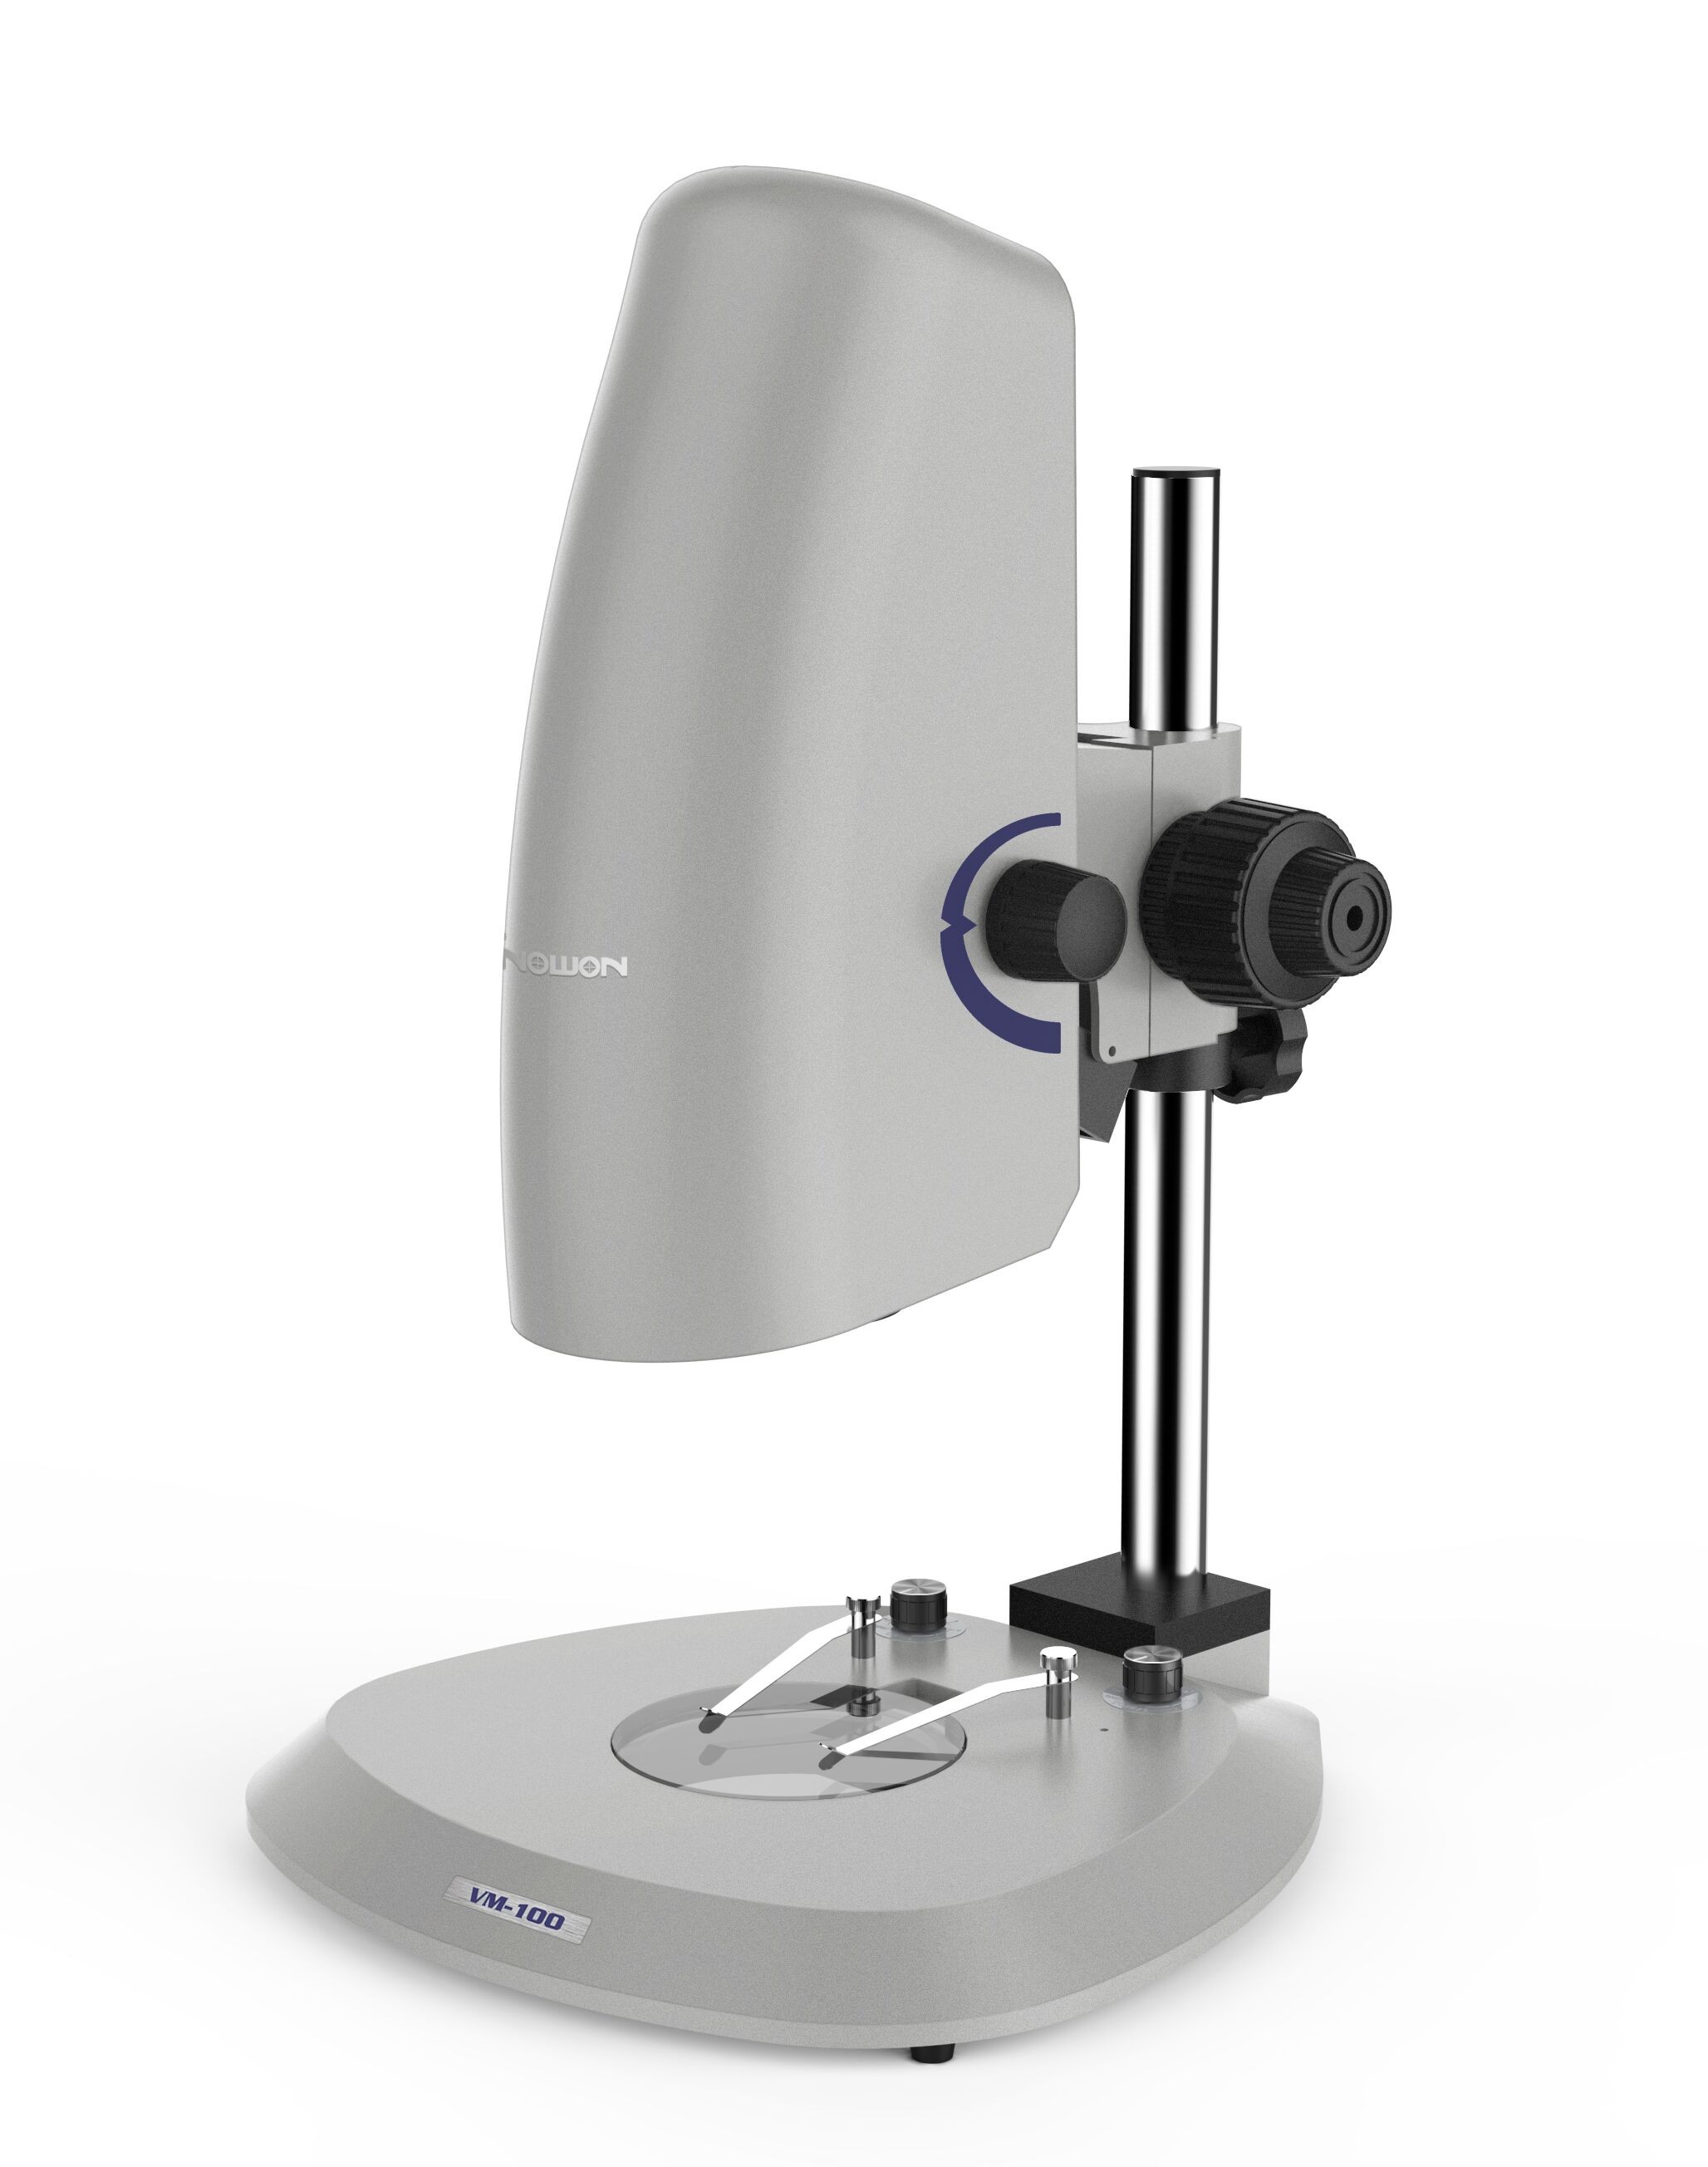  Observation High Resolution Video microscopio With VGA Industrial Camera Manufactures